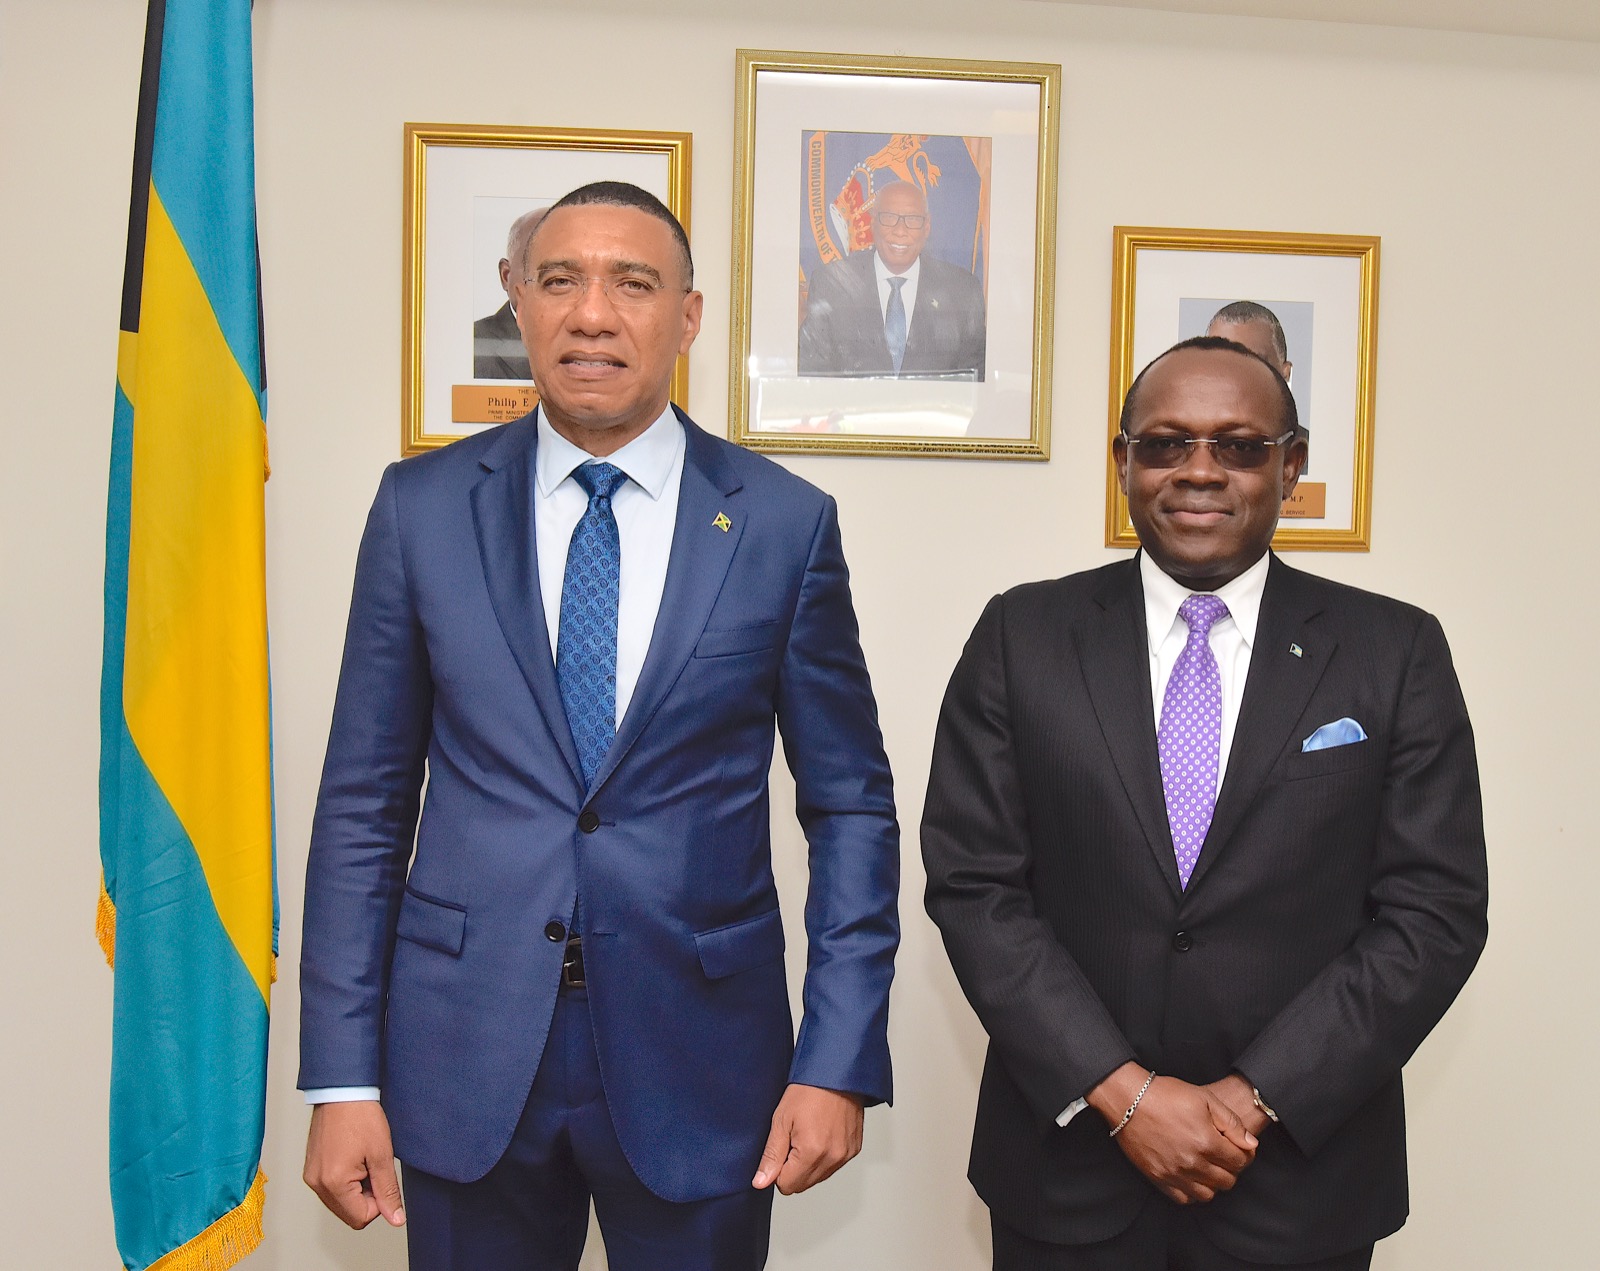 PHOTOS PM at the Heads of Government Meeting in the Bahamas